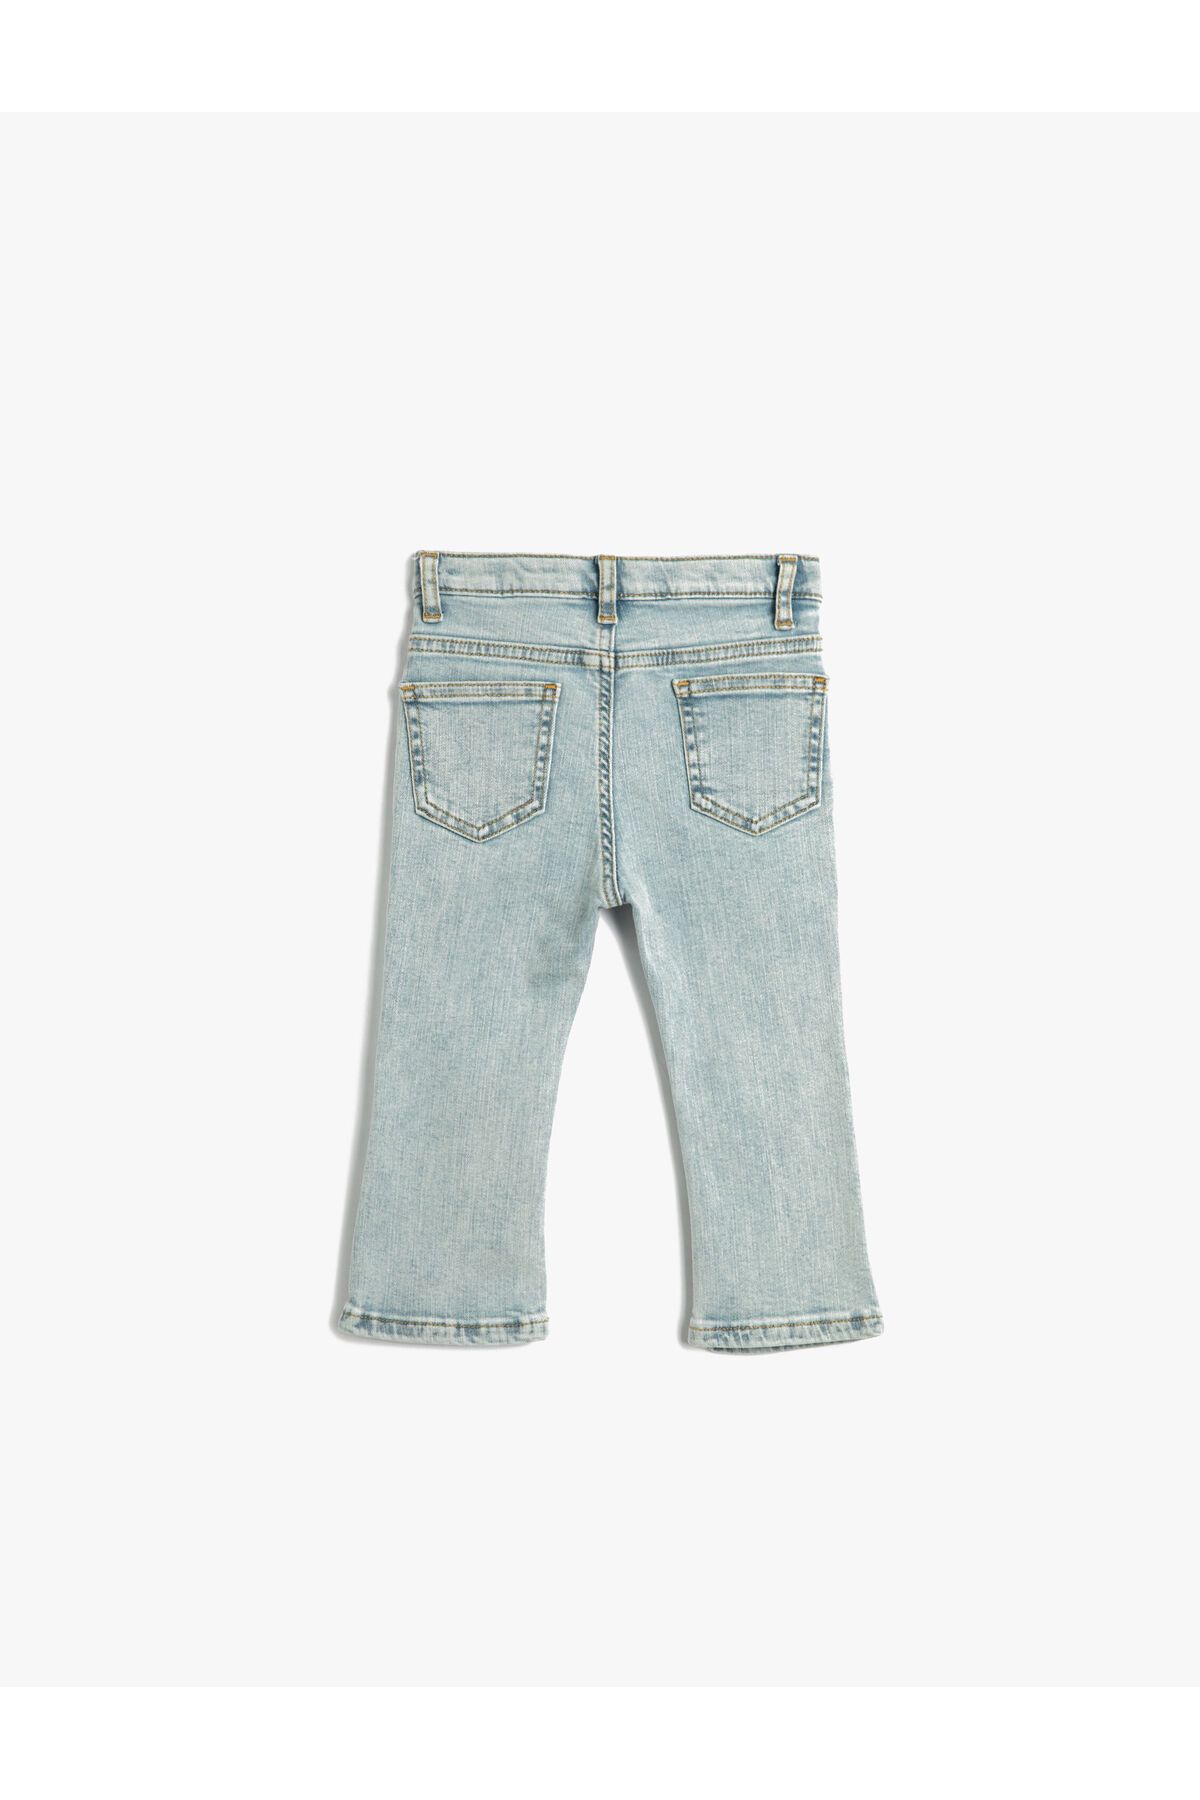 Koton Flare Jeans Pocketed Cotton - Jean